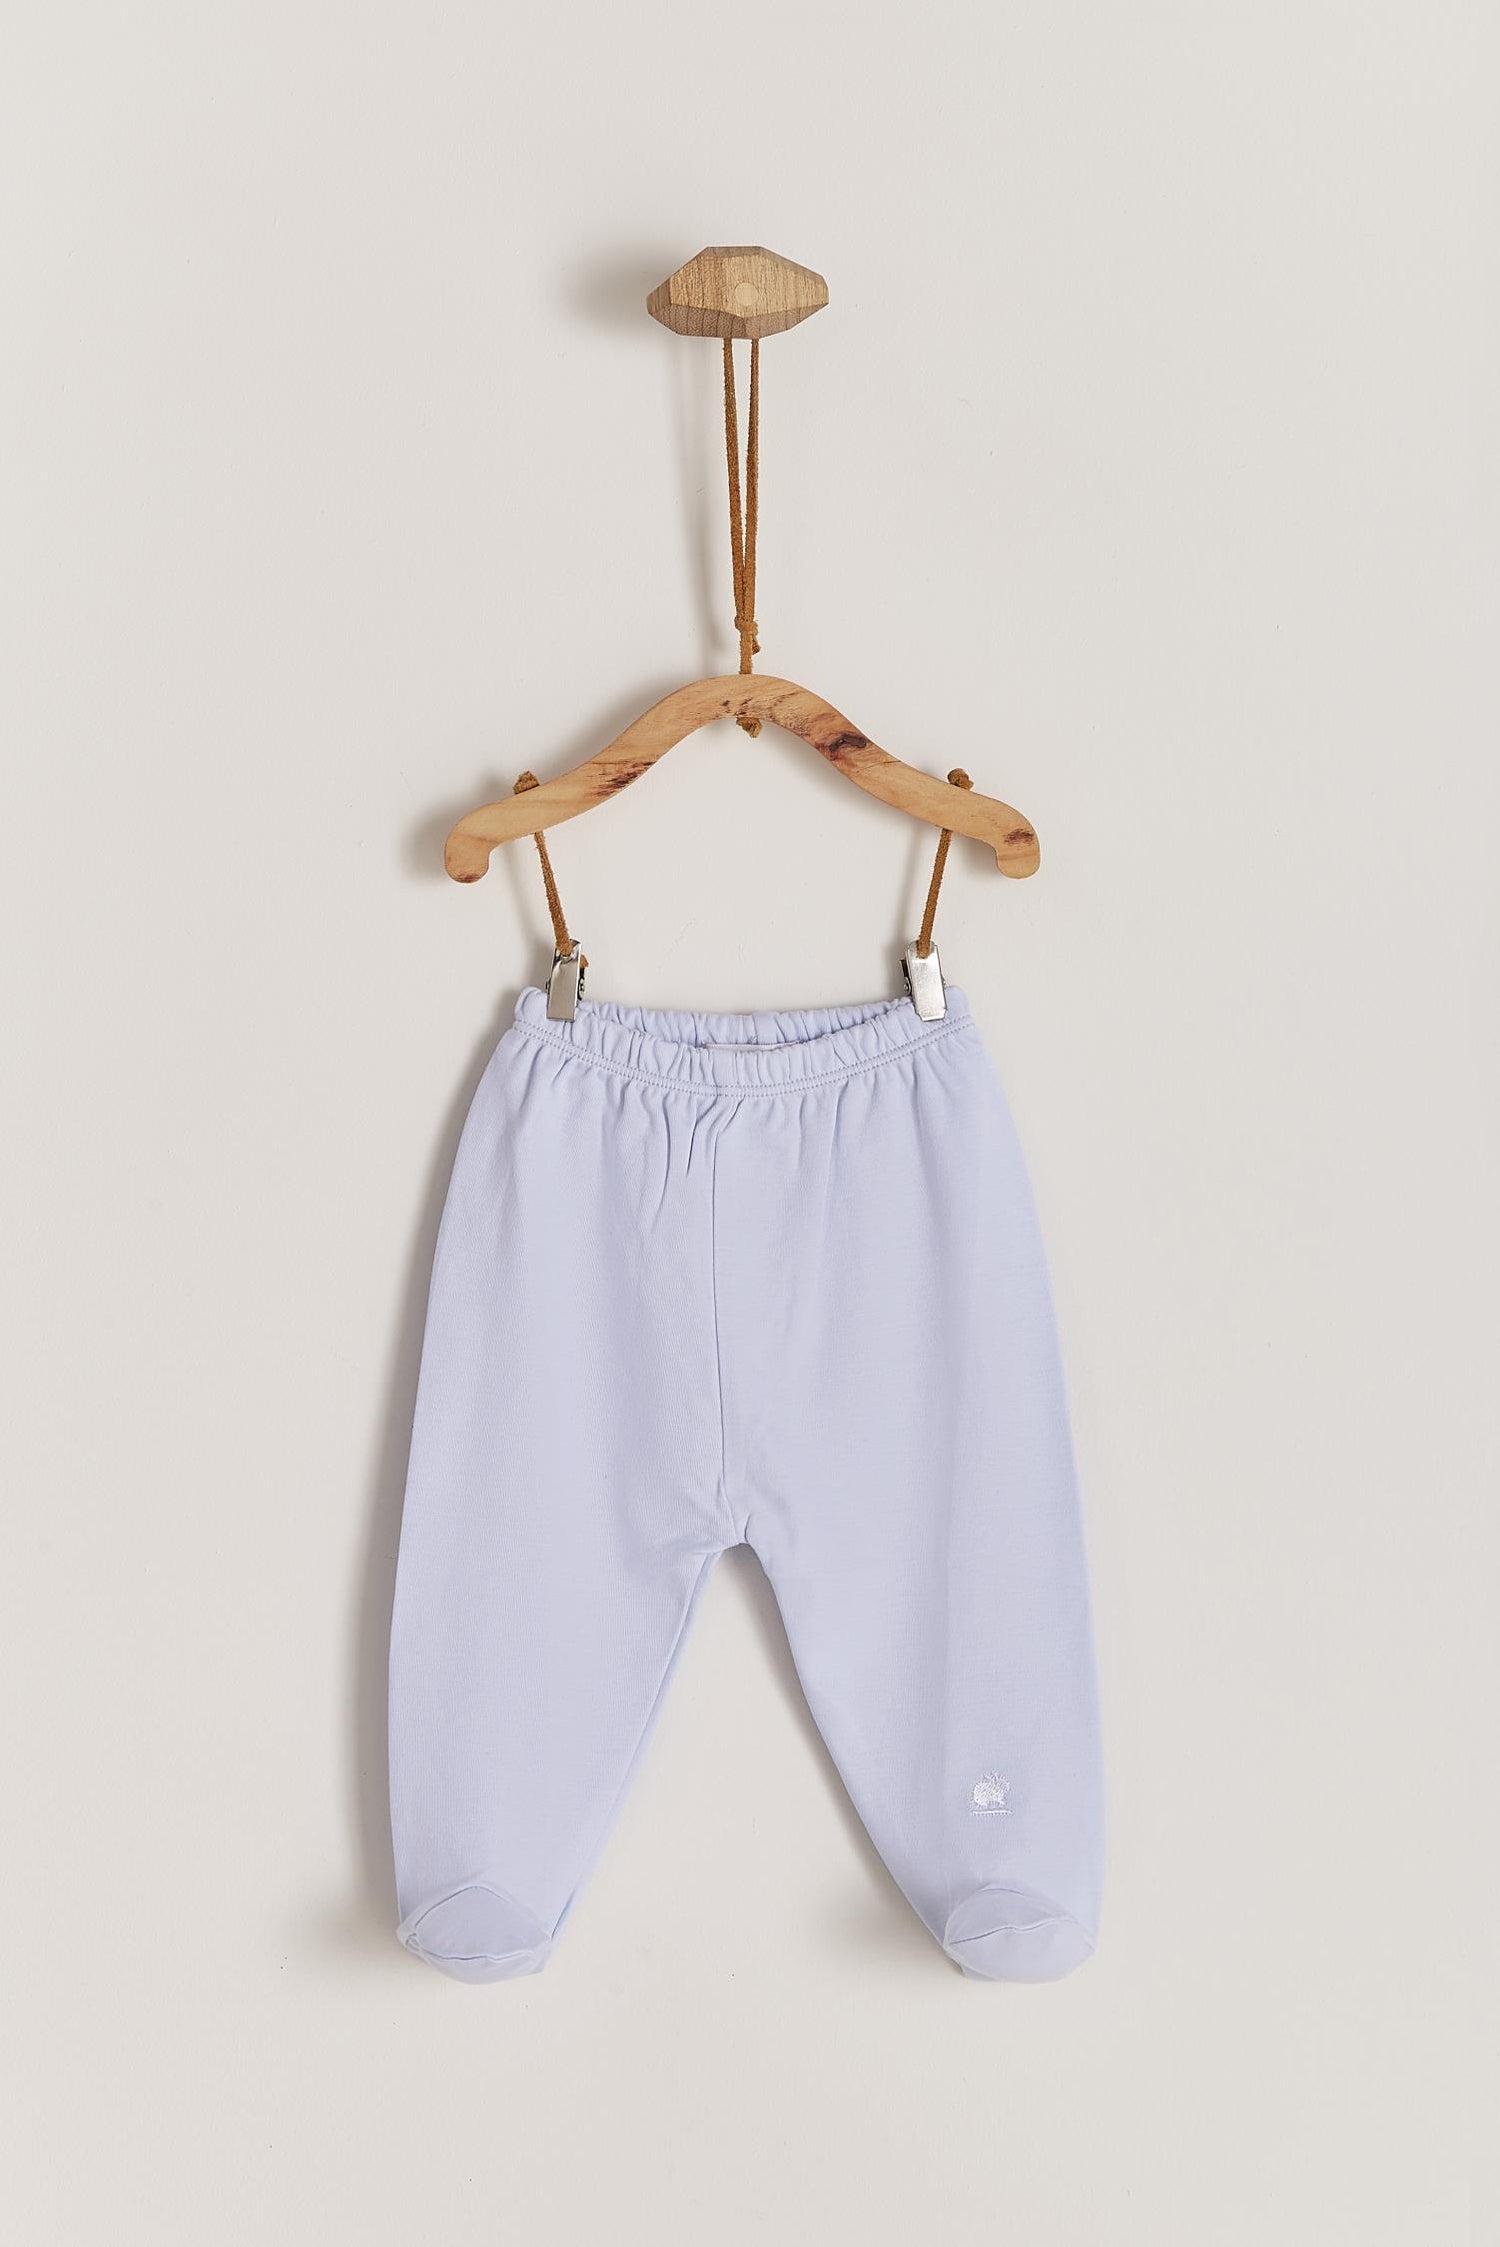 Trendy Cozy and All New Arrivals of Baby Footed Pants  Alibabacom